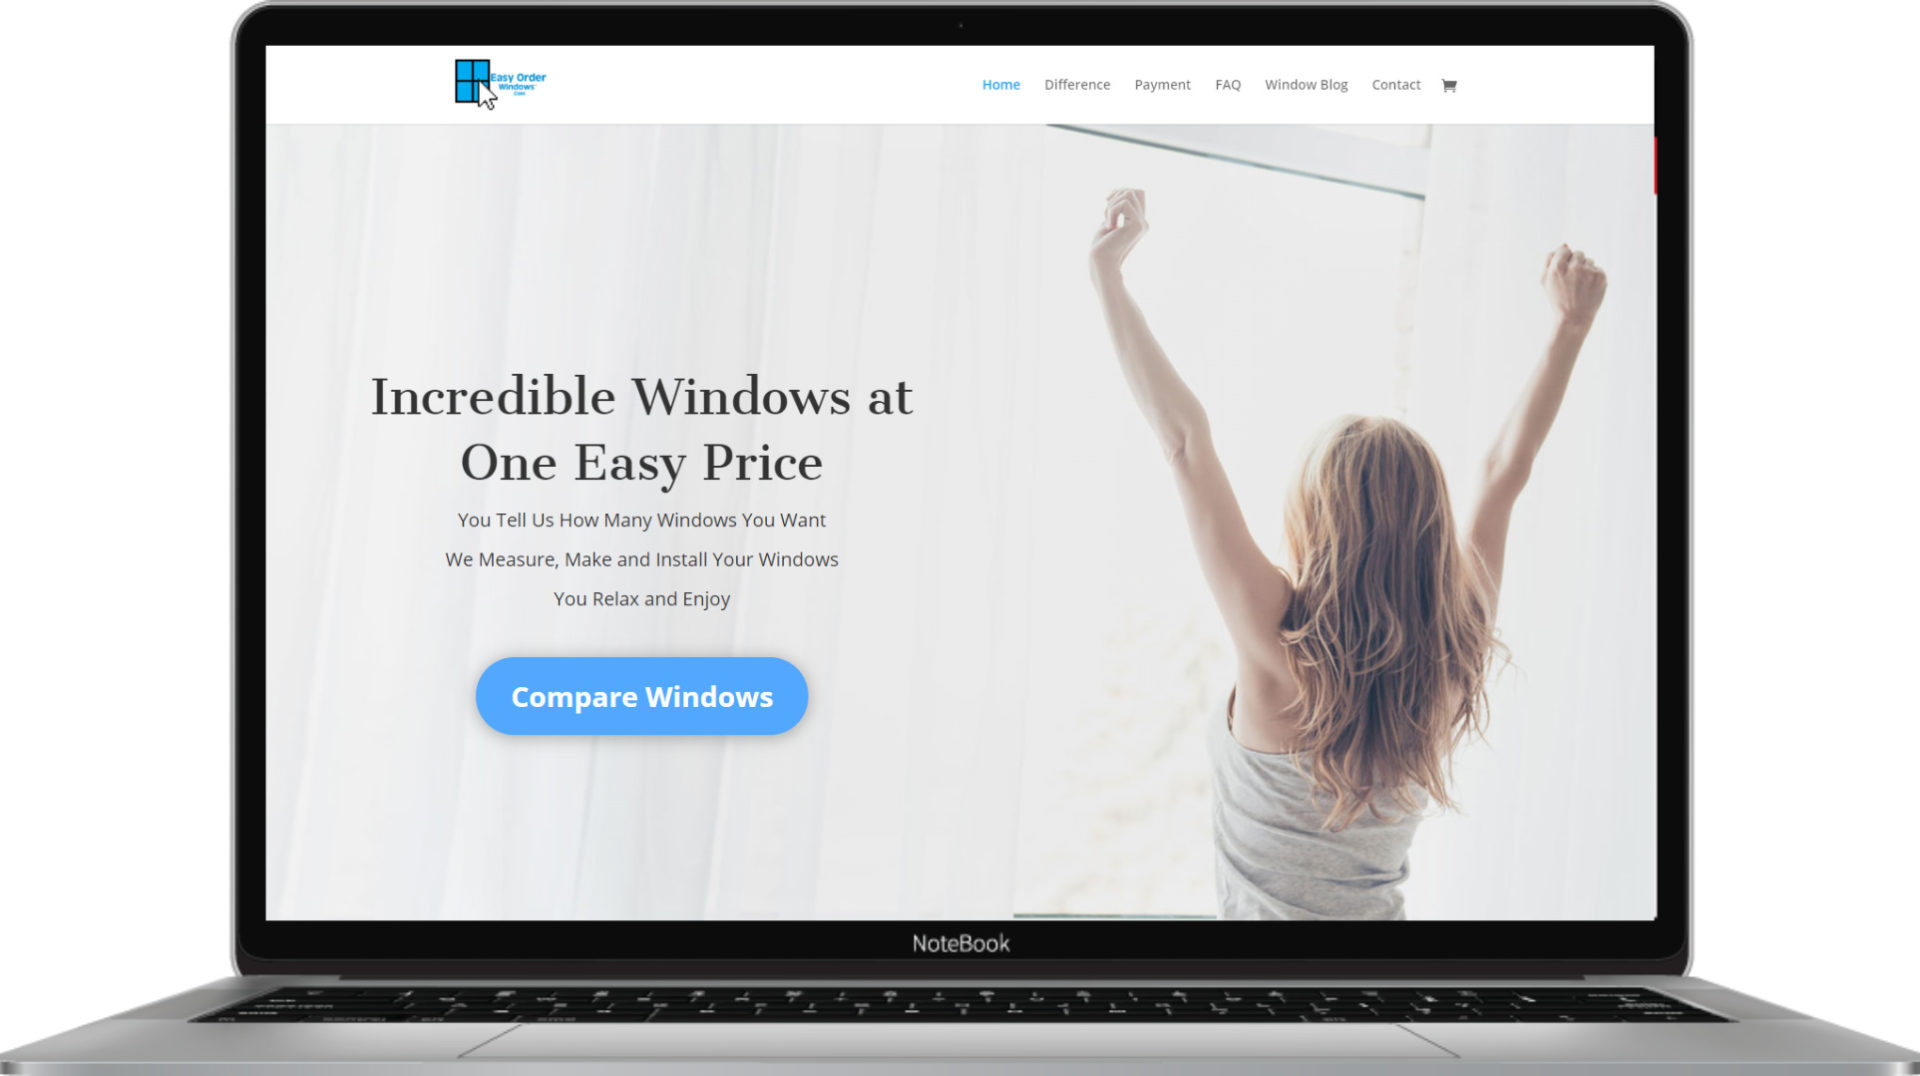 Easy Order Windows Home Page